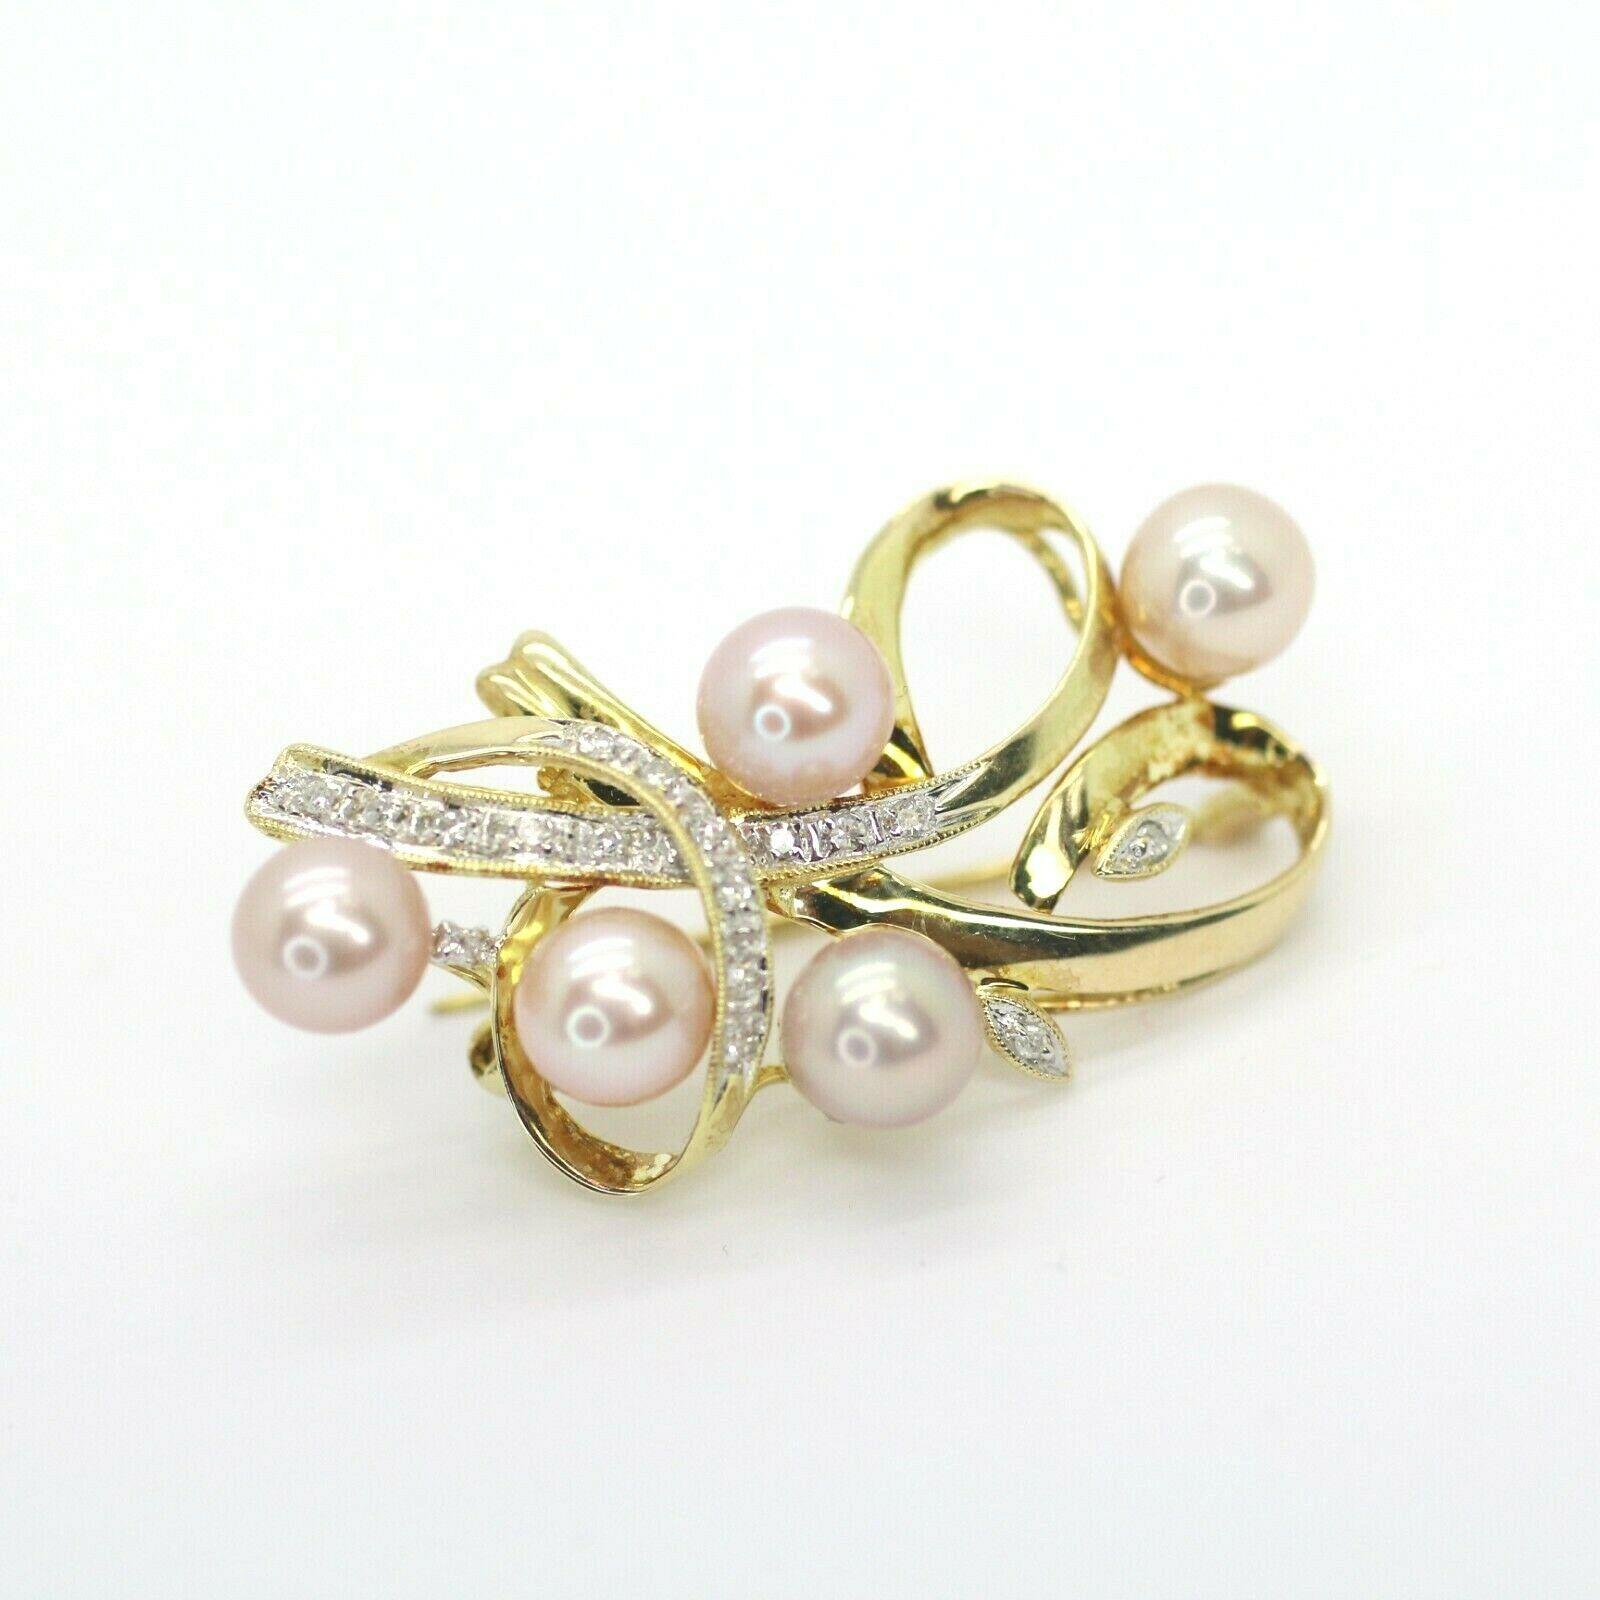 Contemporary 14k Yellow Gold Diamond and Pearl Brooch/Pin